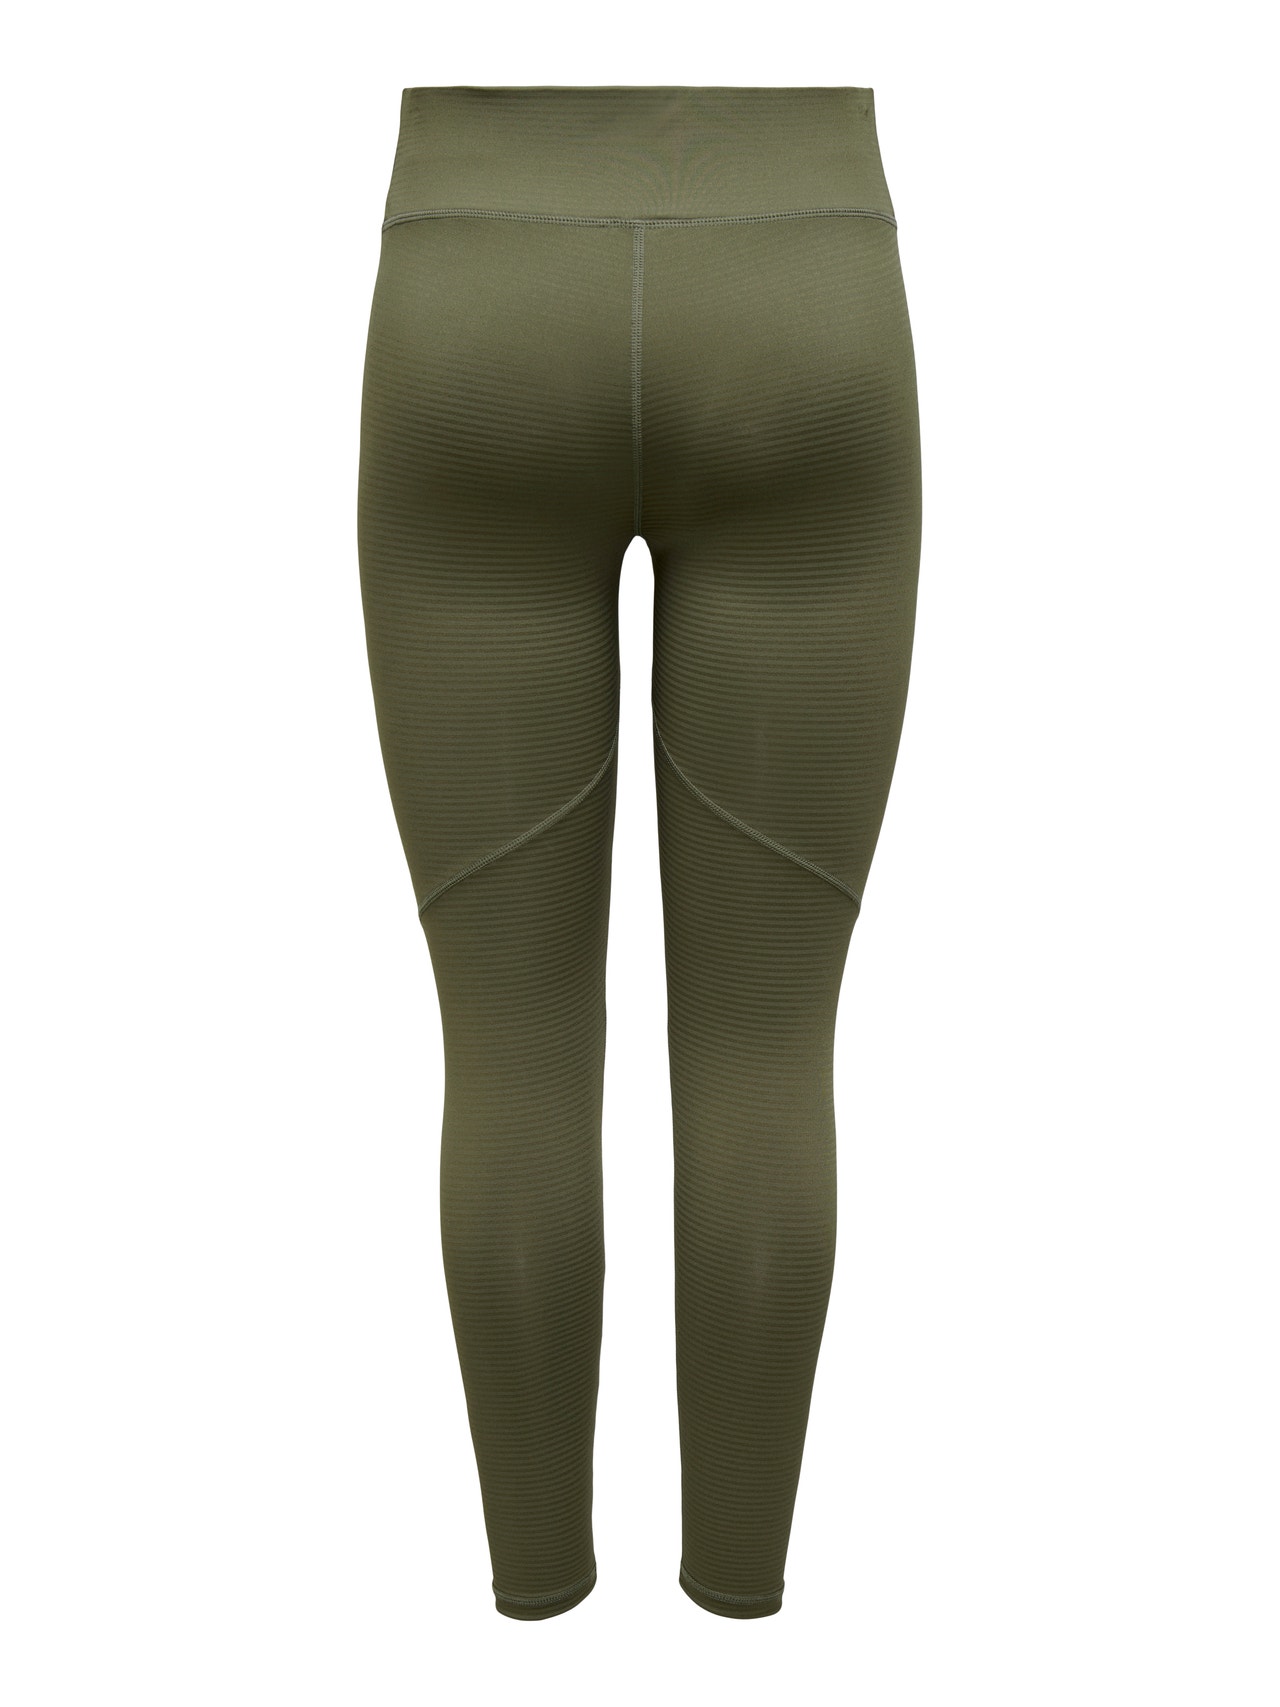 ONLY Solid colored Training Tights -Tarmac - 15253999